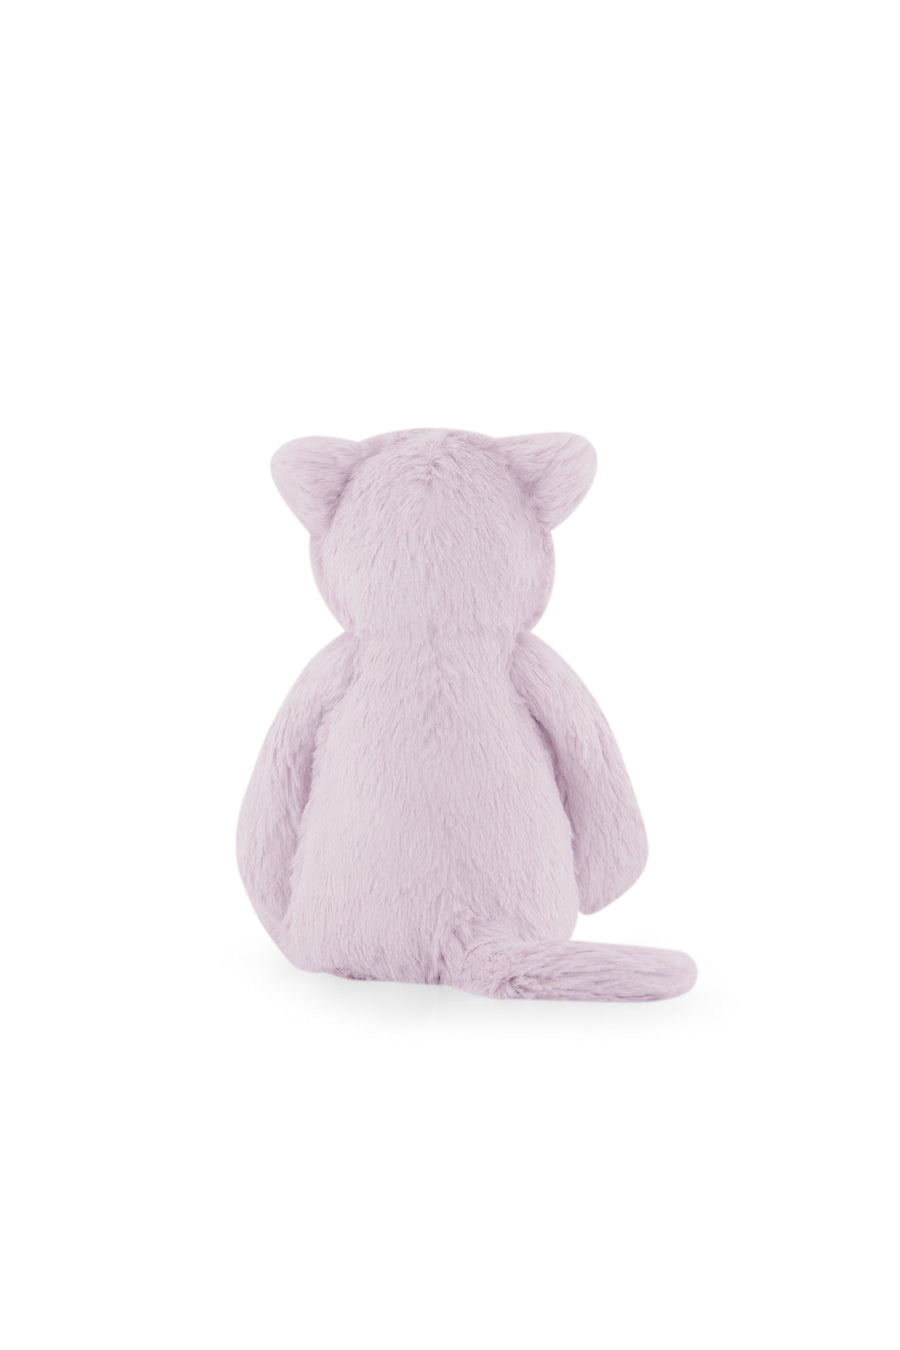 Snuggle Bunnies - Elsie the Kitty - Violet Childrens Toy from Jamie Kay NZ